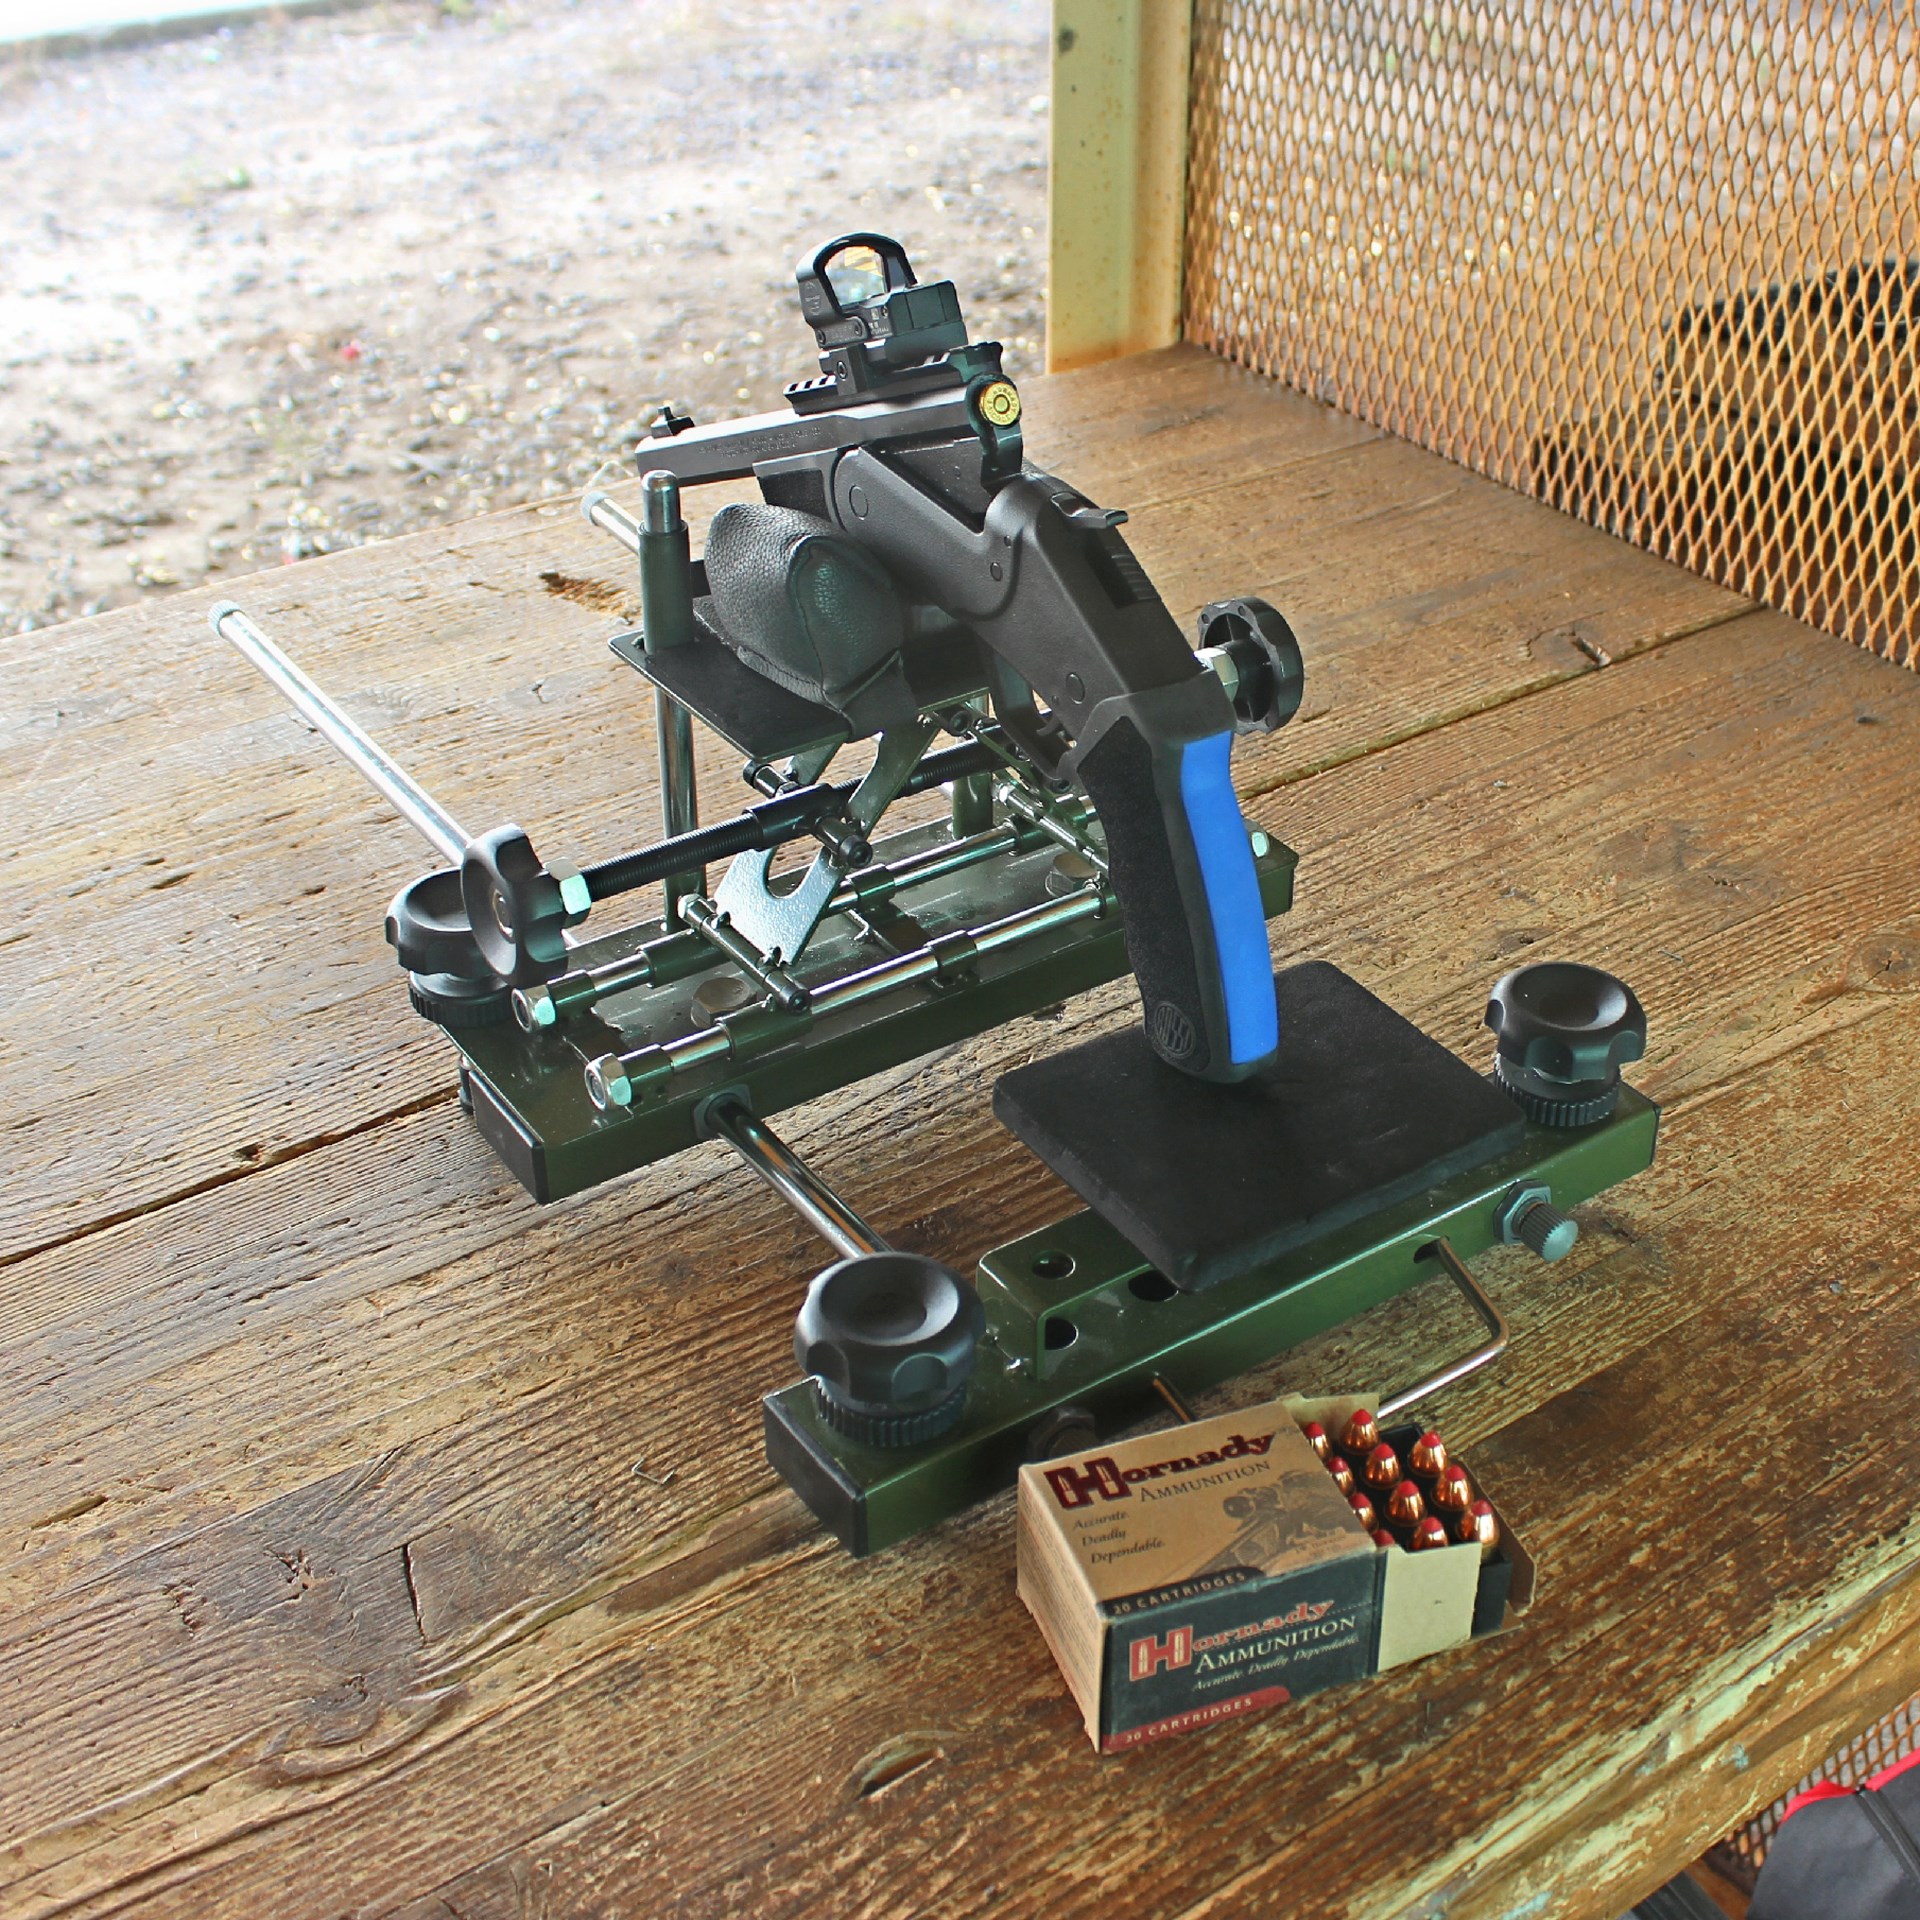 The .45 Colt cartridge testing was conducted with an optic from a bench rest.